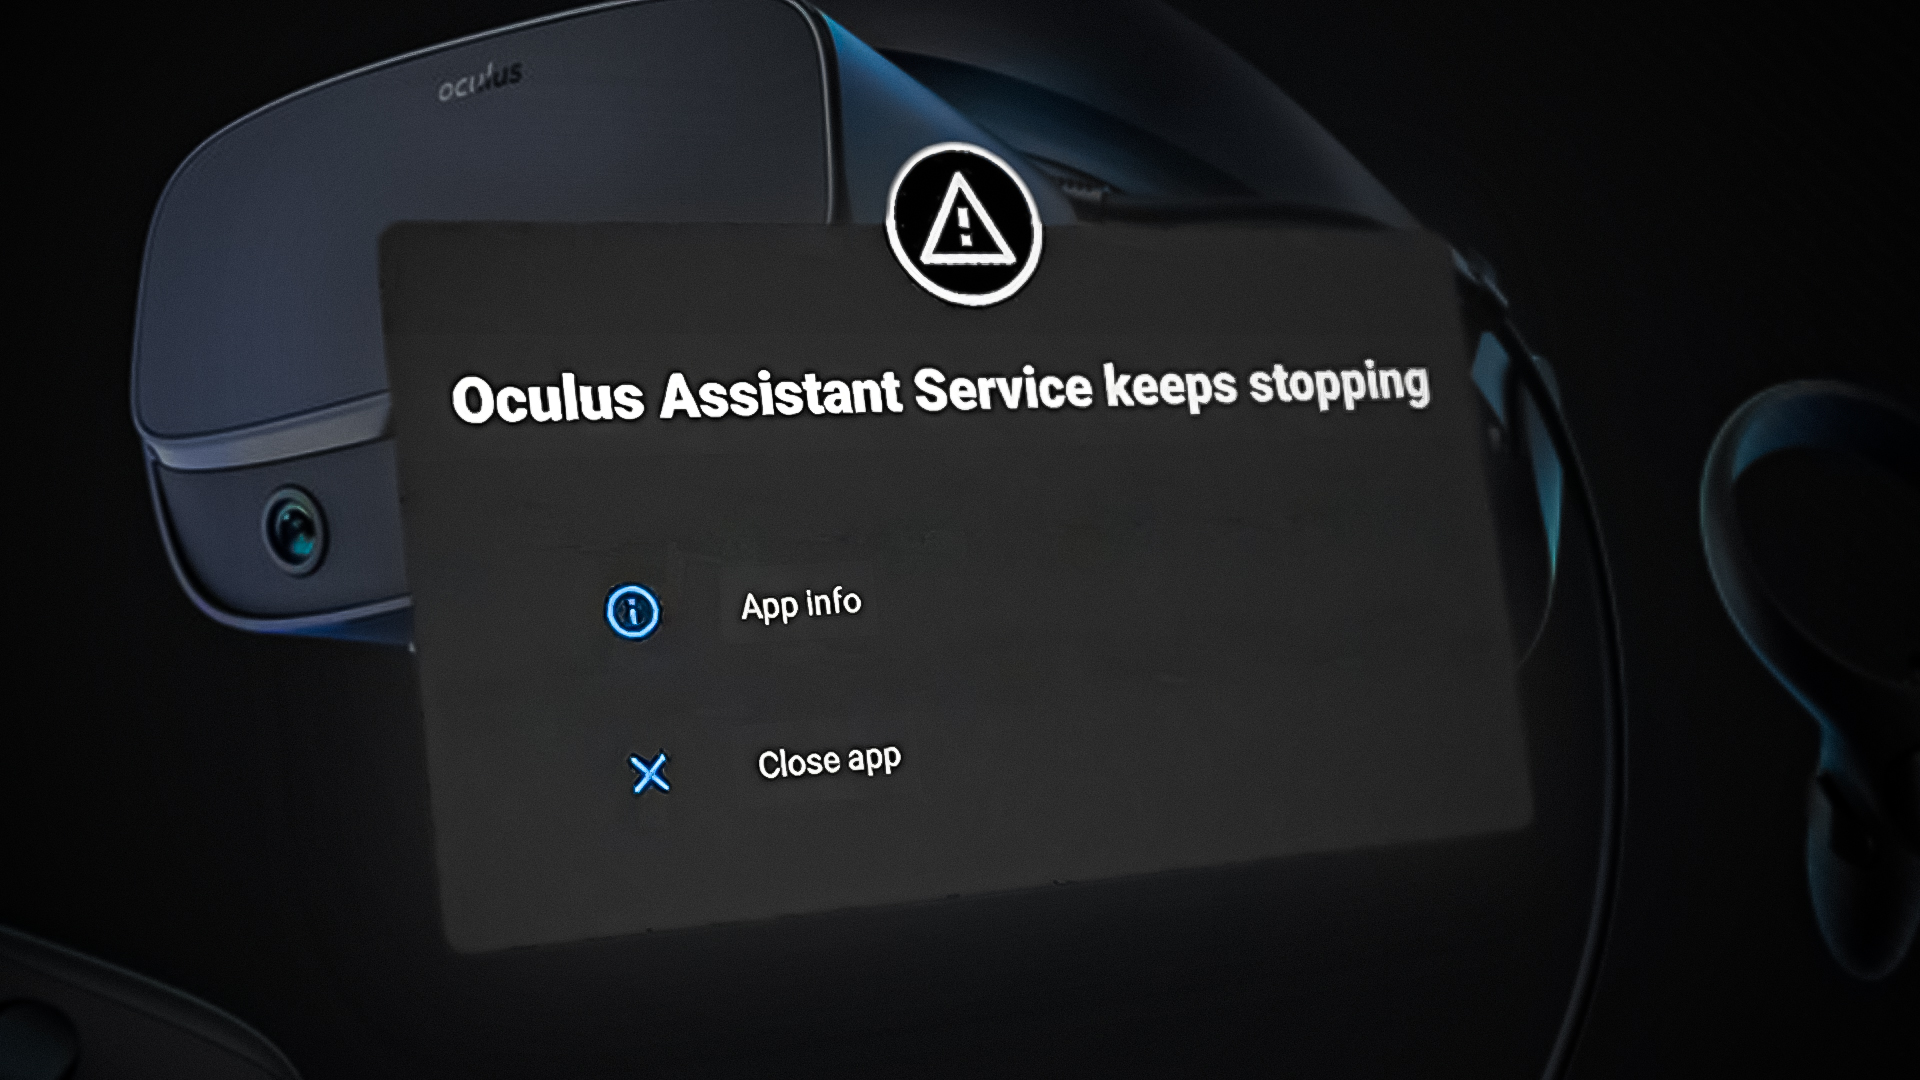 Oculus Assistant Service keeps Stopping Error